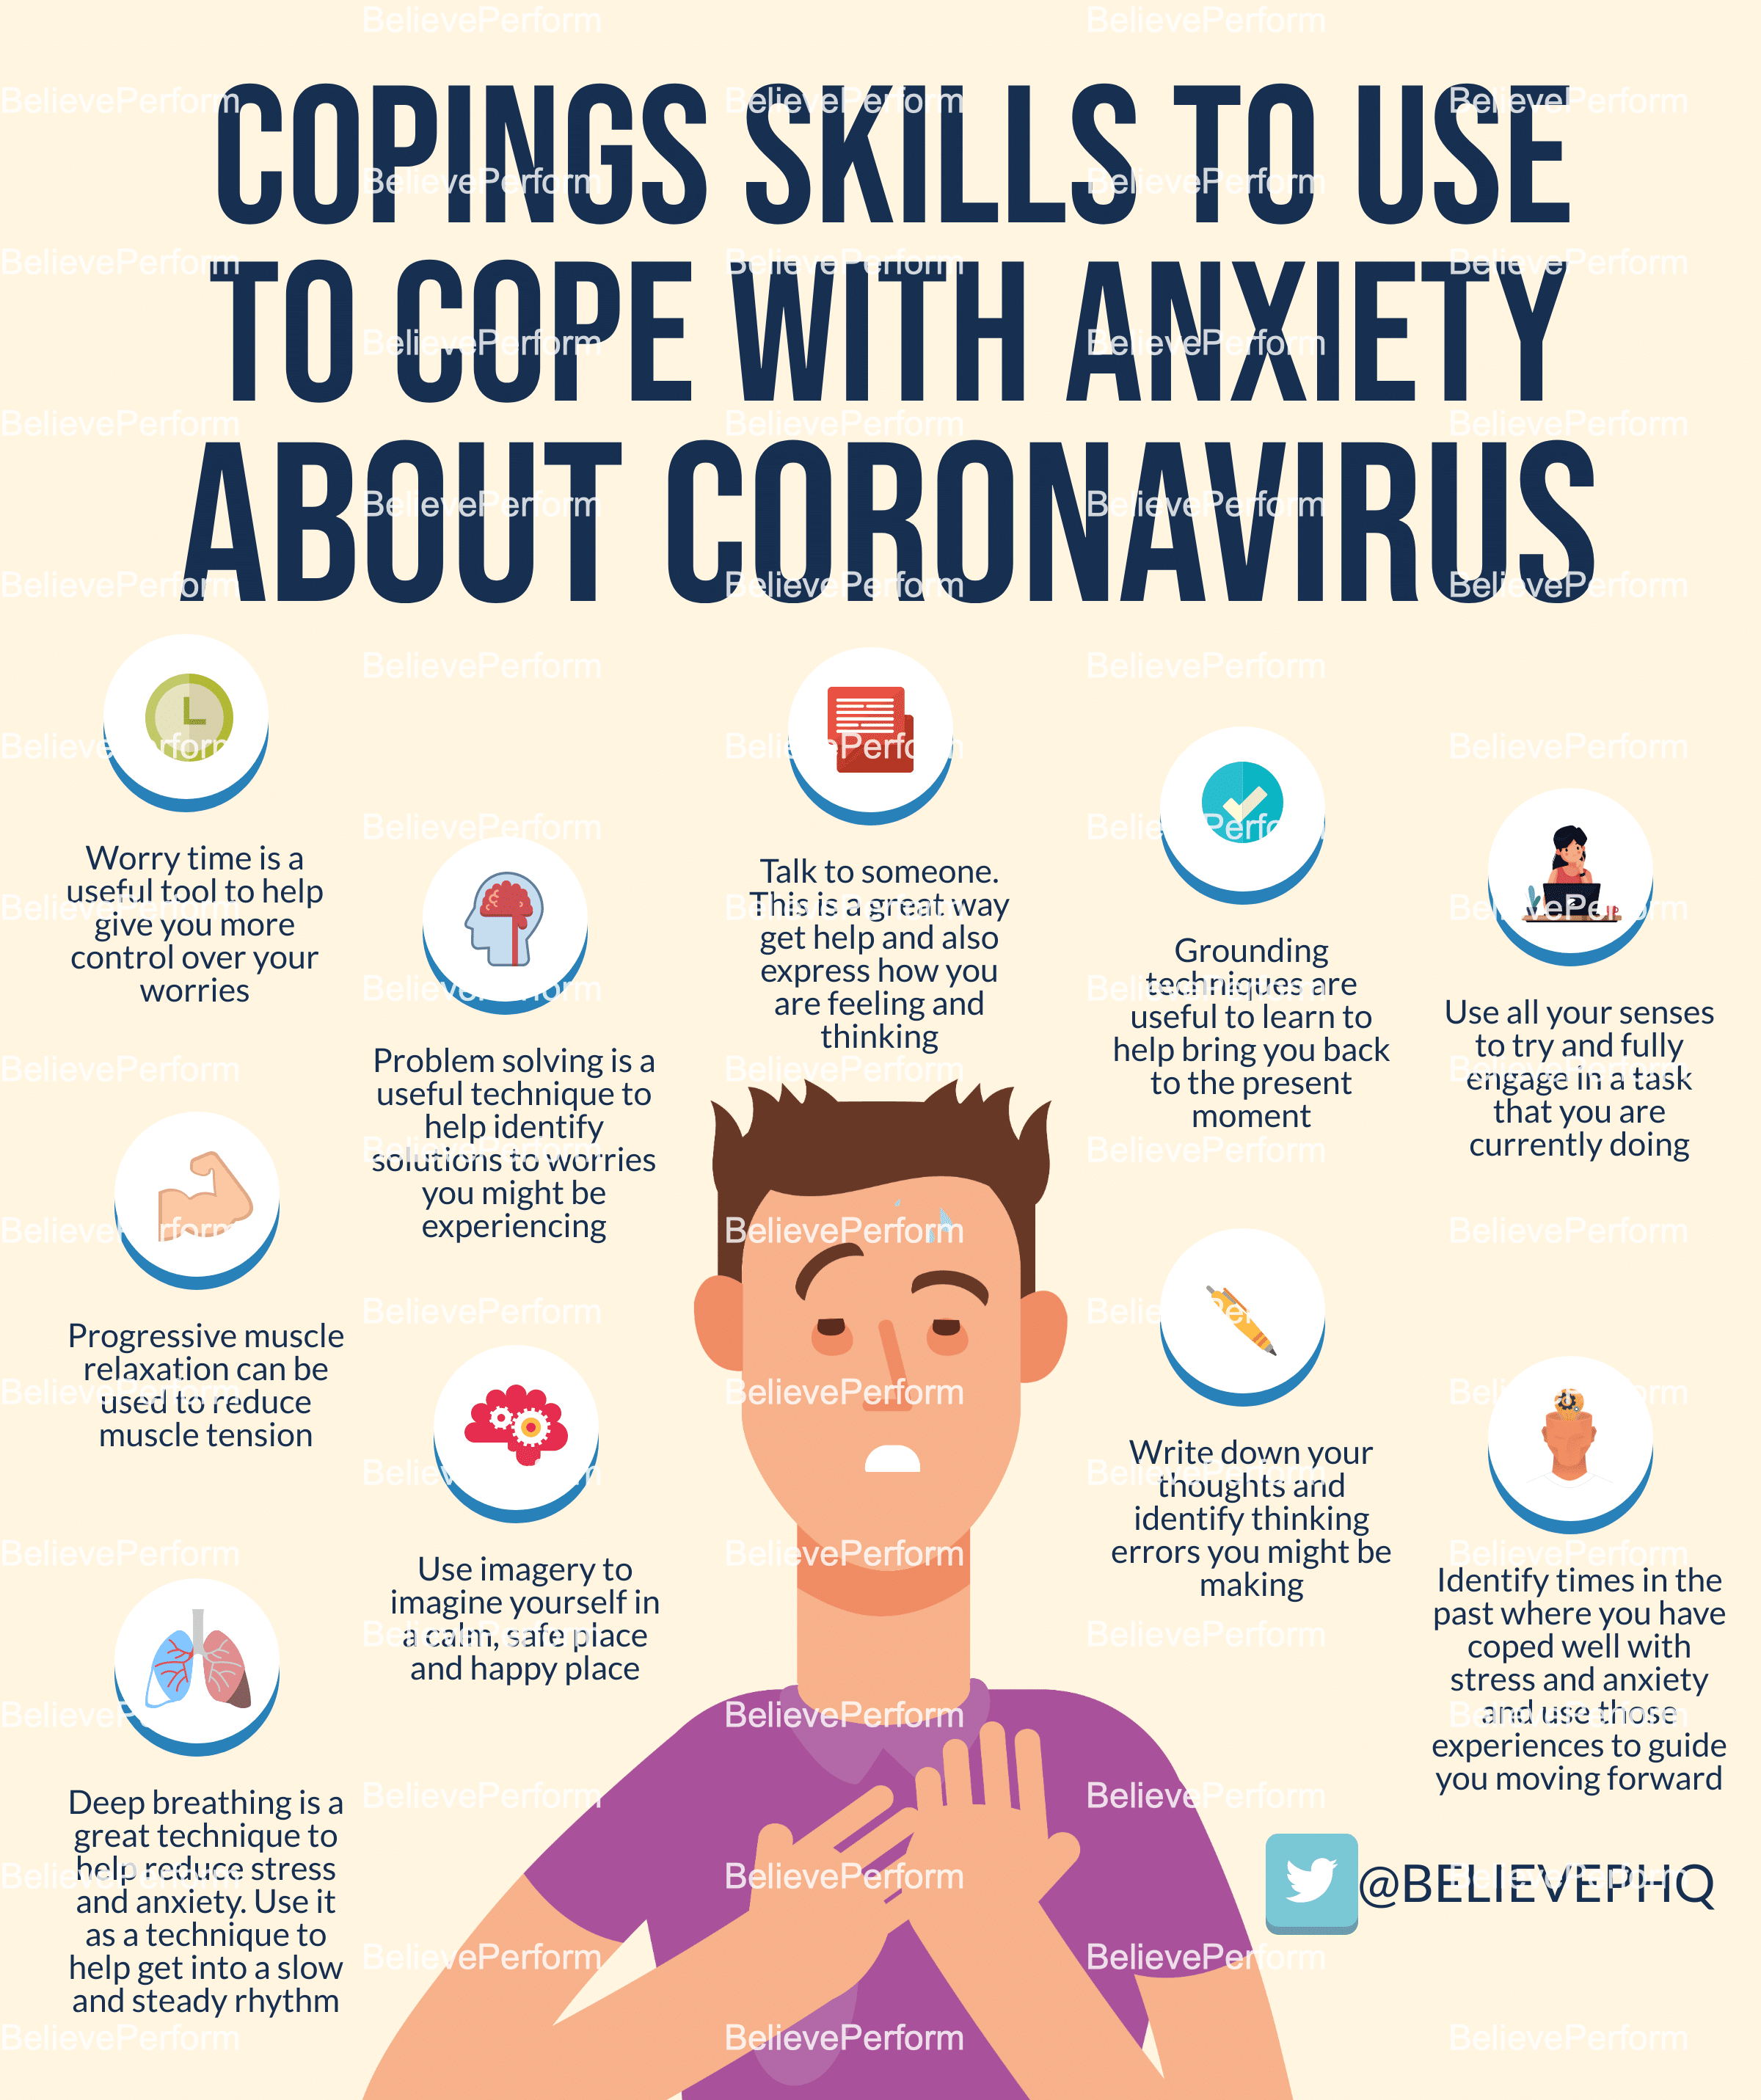 Copings skills to use to cope with anxiety about coronavirus ...